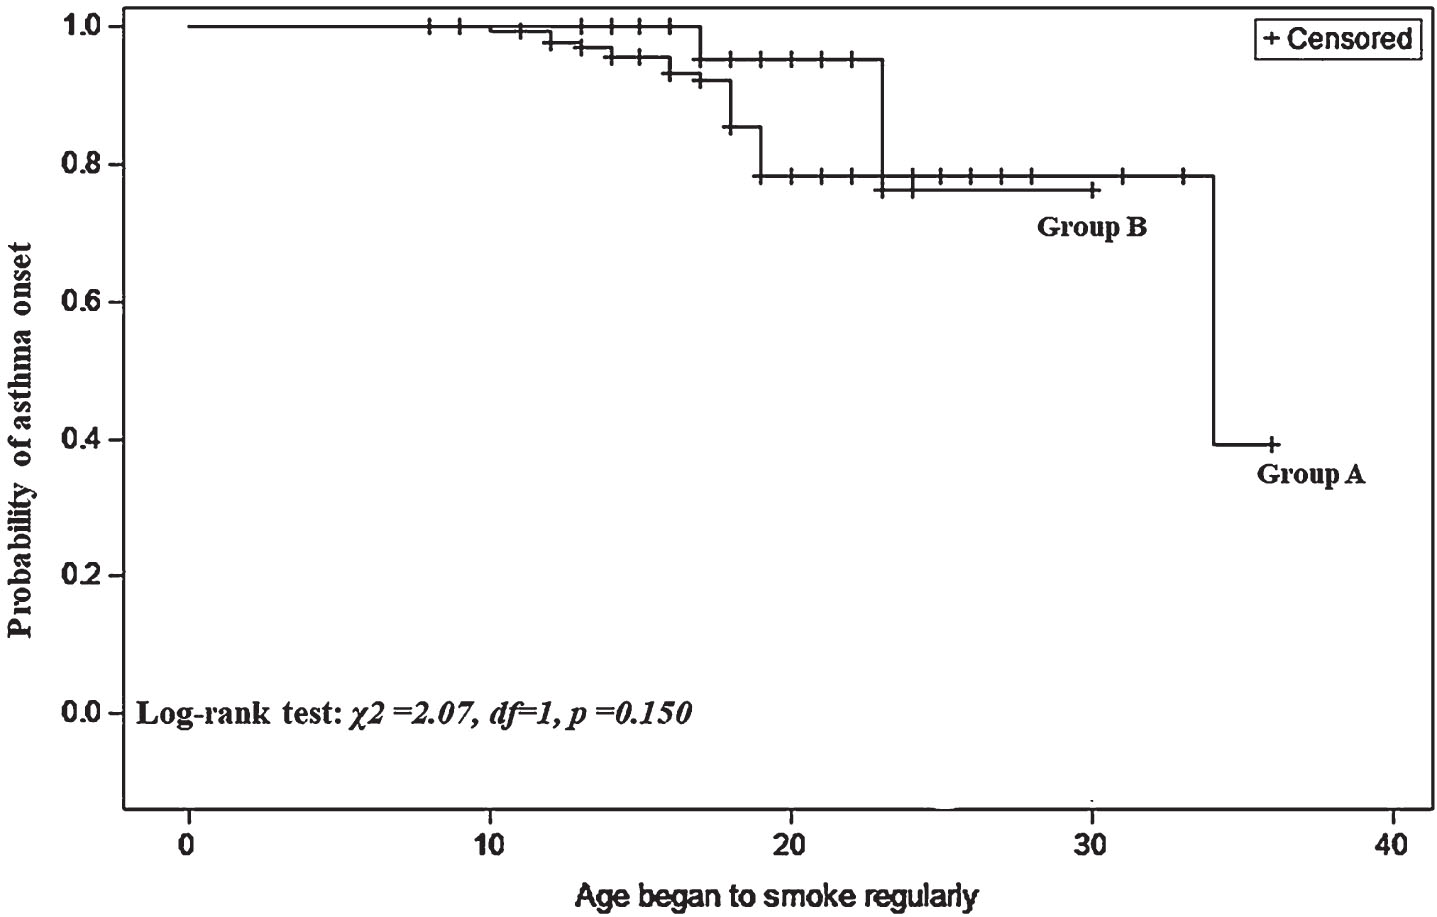 Kepler-Meire curve for age began to smoke regularly and probability of asthma onset among groups.